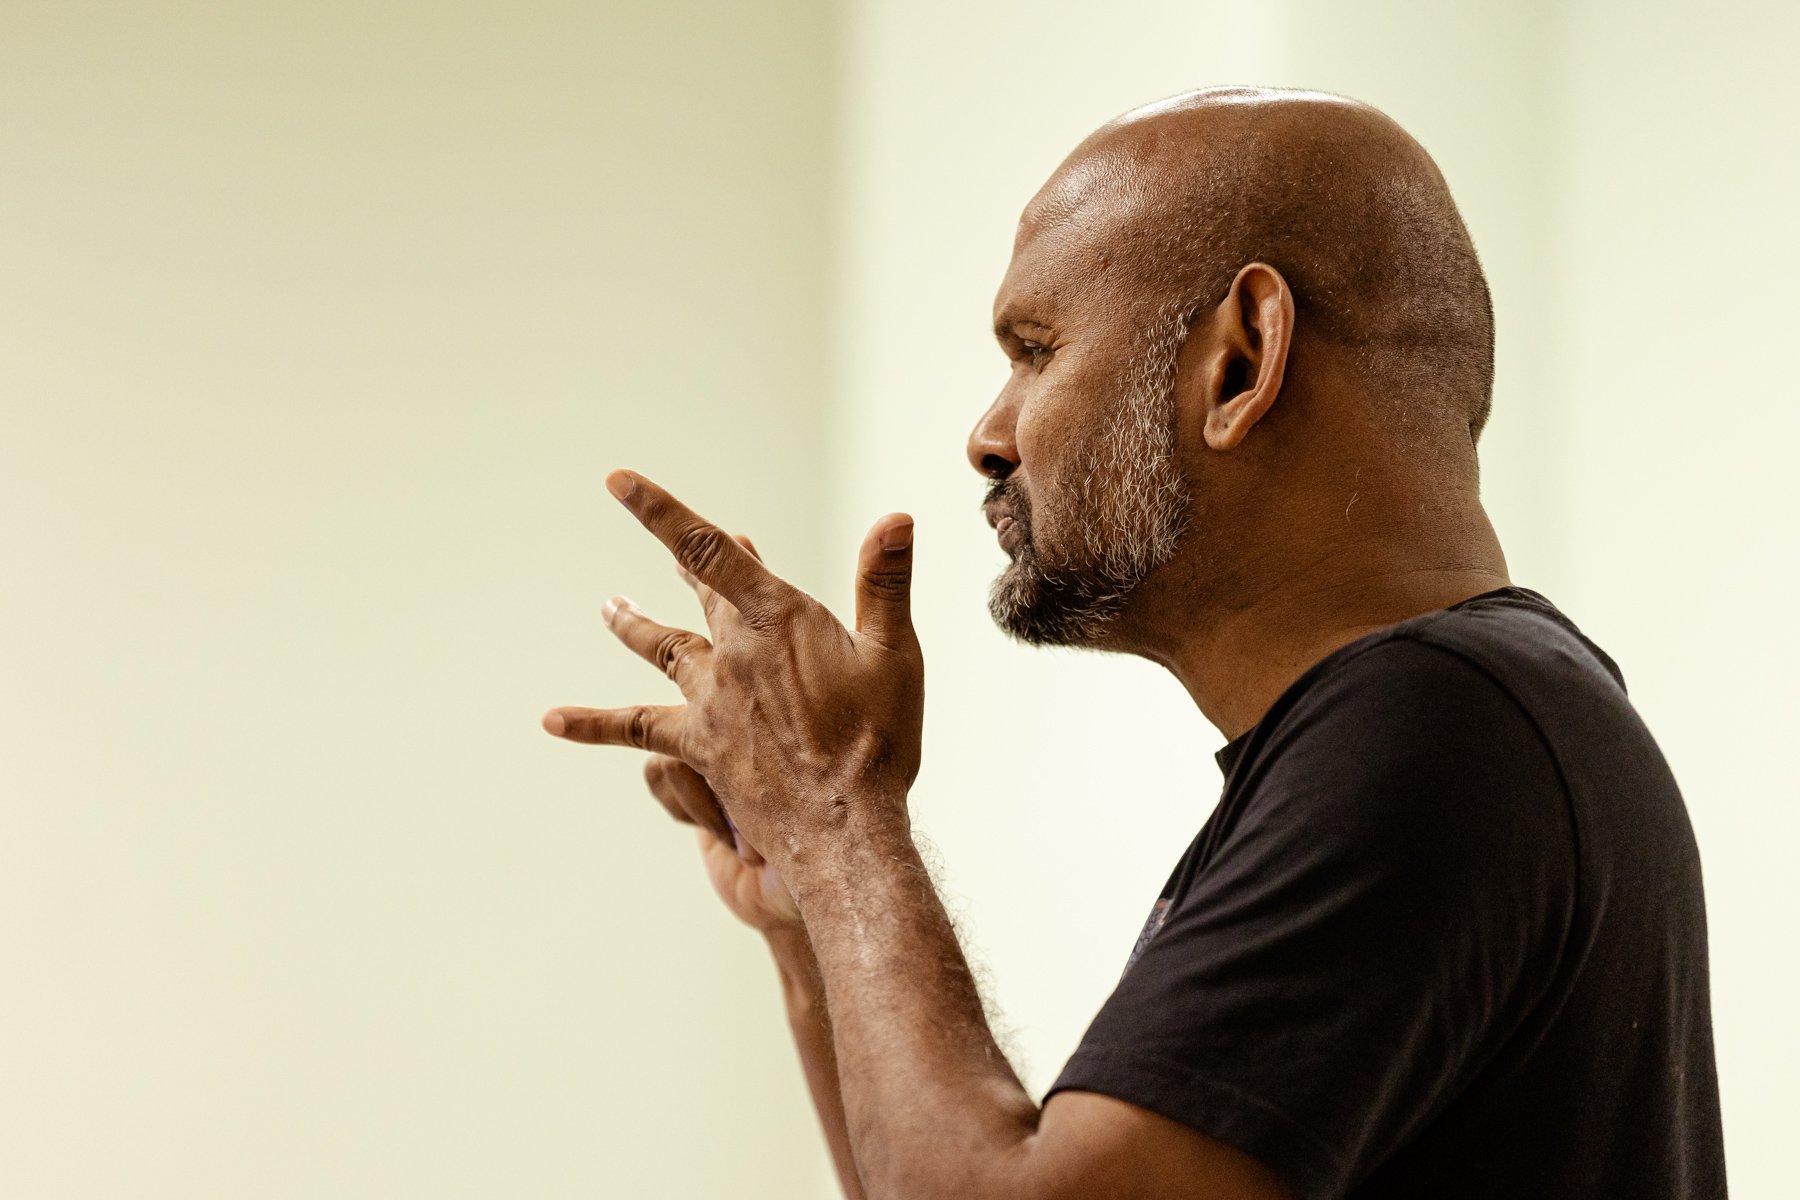  Photo of actor Ramesh Meyyappan in the rehearsal room. He is facing sideways and is in the middle of signing something with his hands, his fingers are raised. 